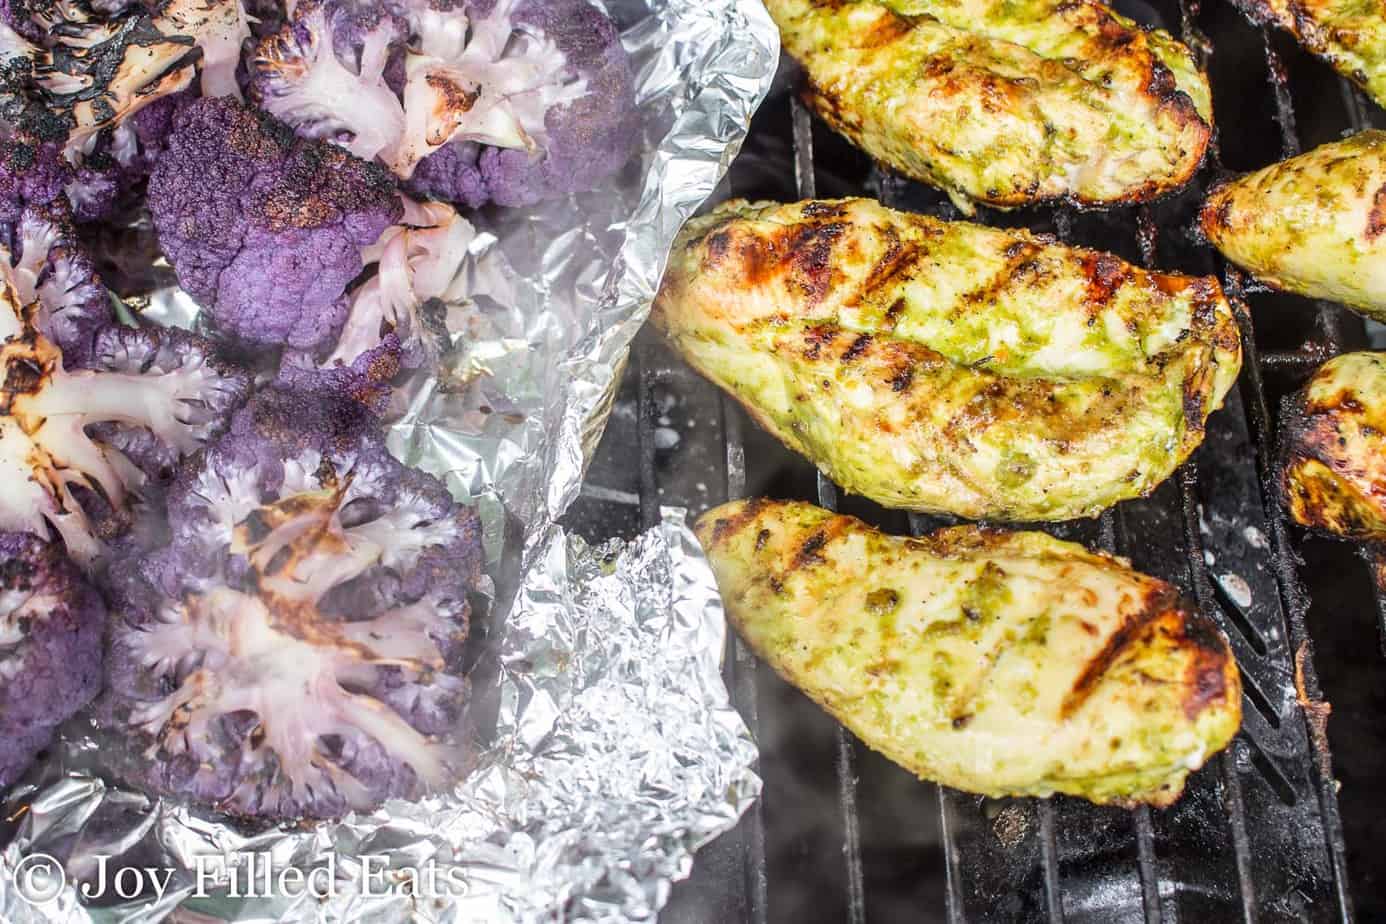 citrus basil grilled chicken placed on a grill next to purple cauliflower in aluminum